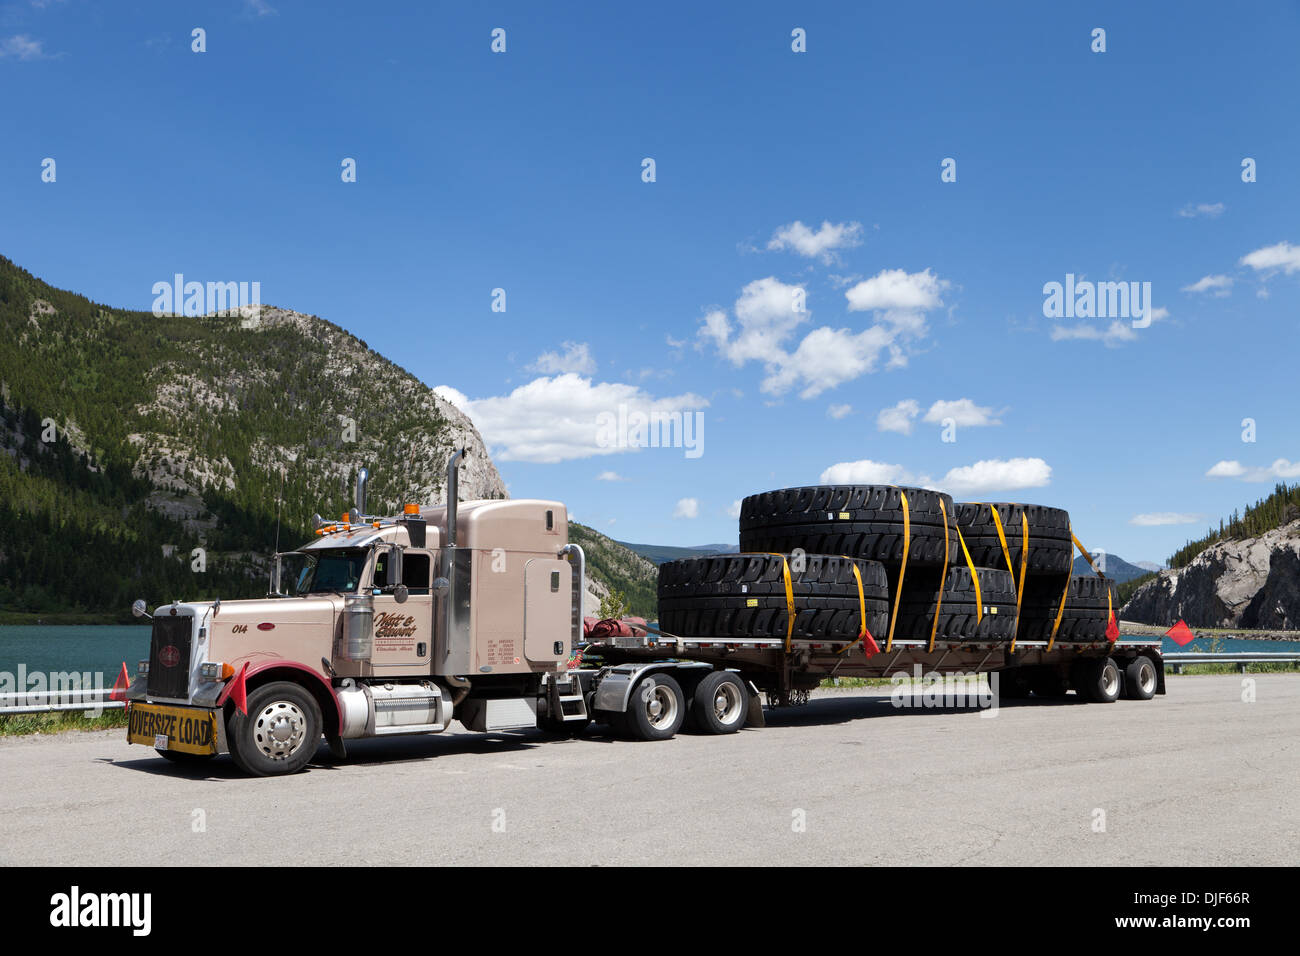 Truck hauling large tires parked at Crowsnest Lake in pull out Alberta, Canada Stock Photo